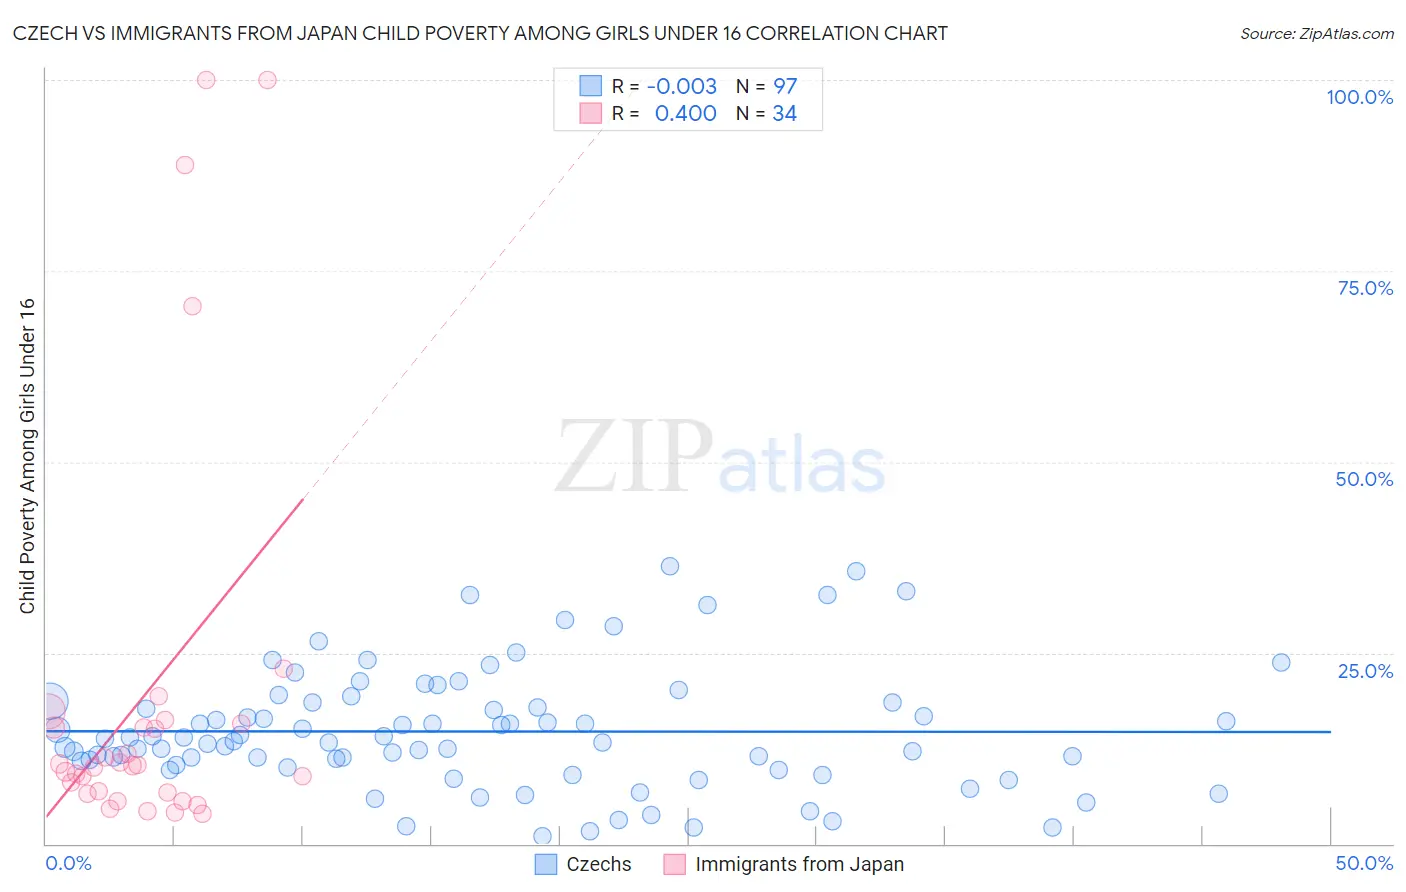 Czech vs Immigrants from Japan Child Poverty Among Girls Under 16